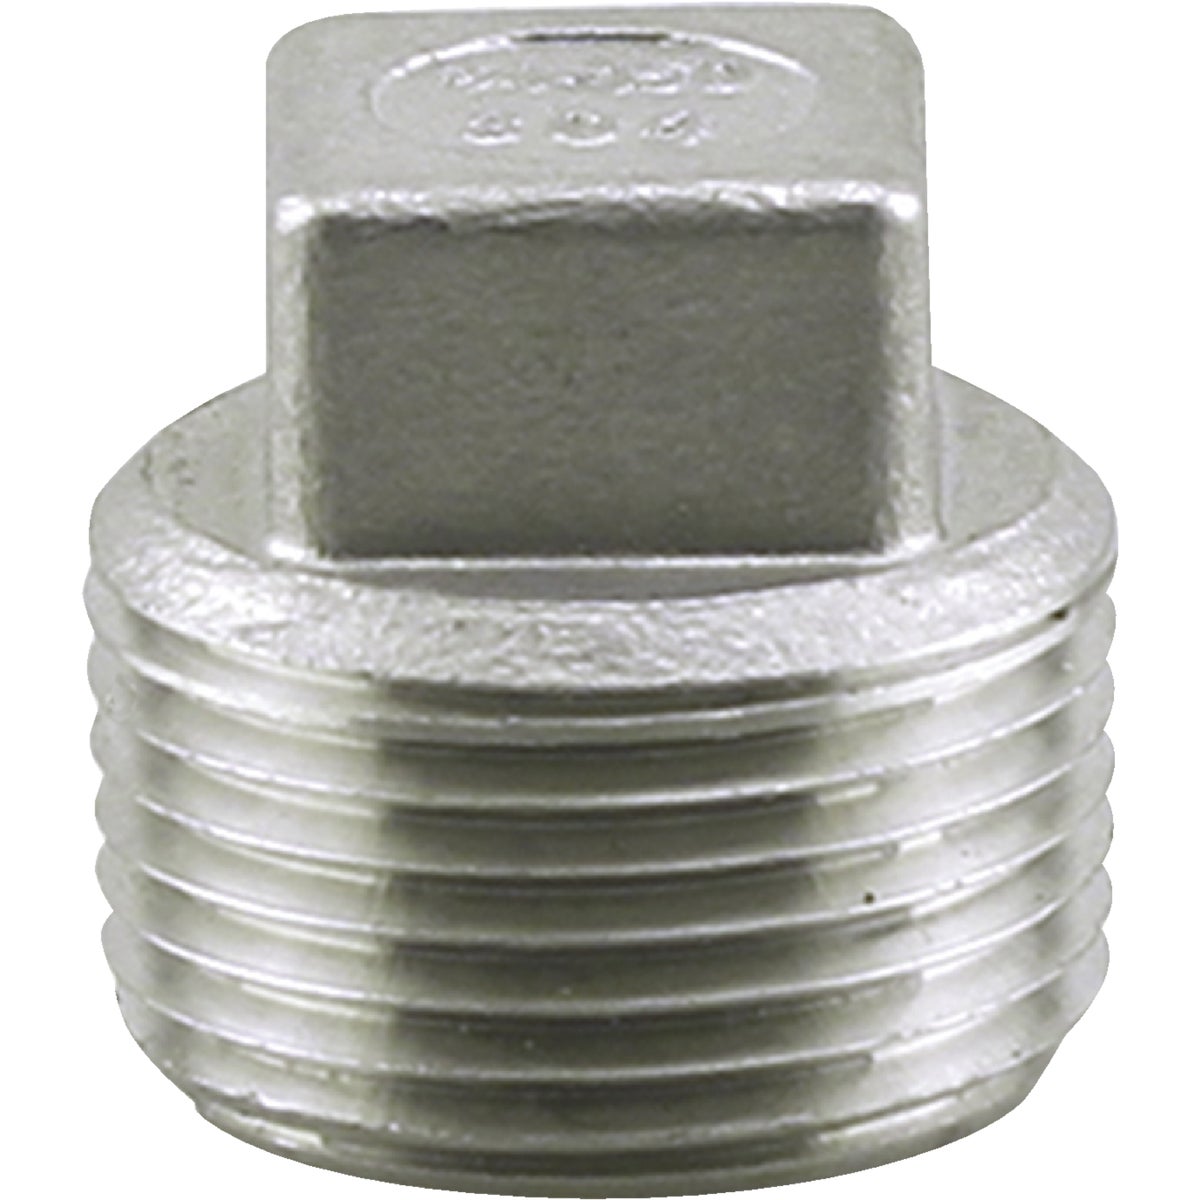 Item 405583, 304 stainless steel fittings are ideal for potable water, under ground and 